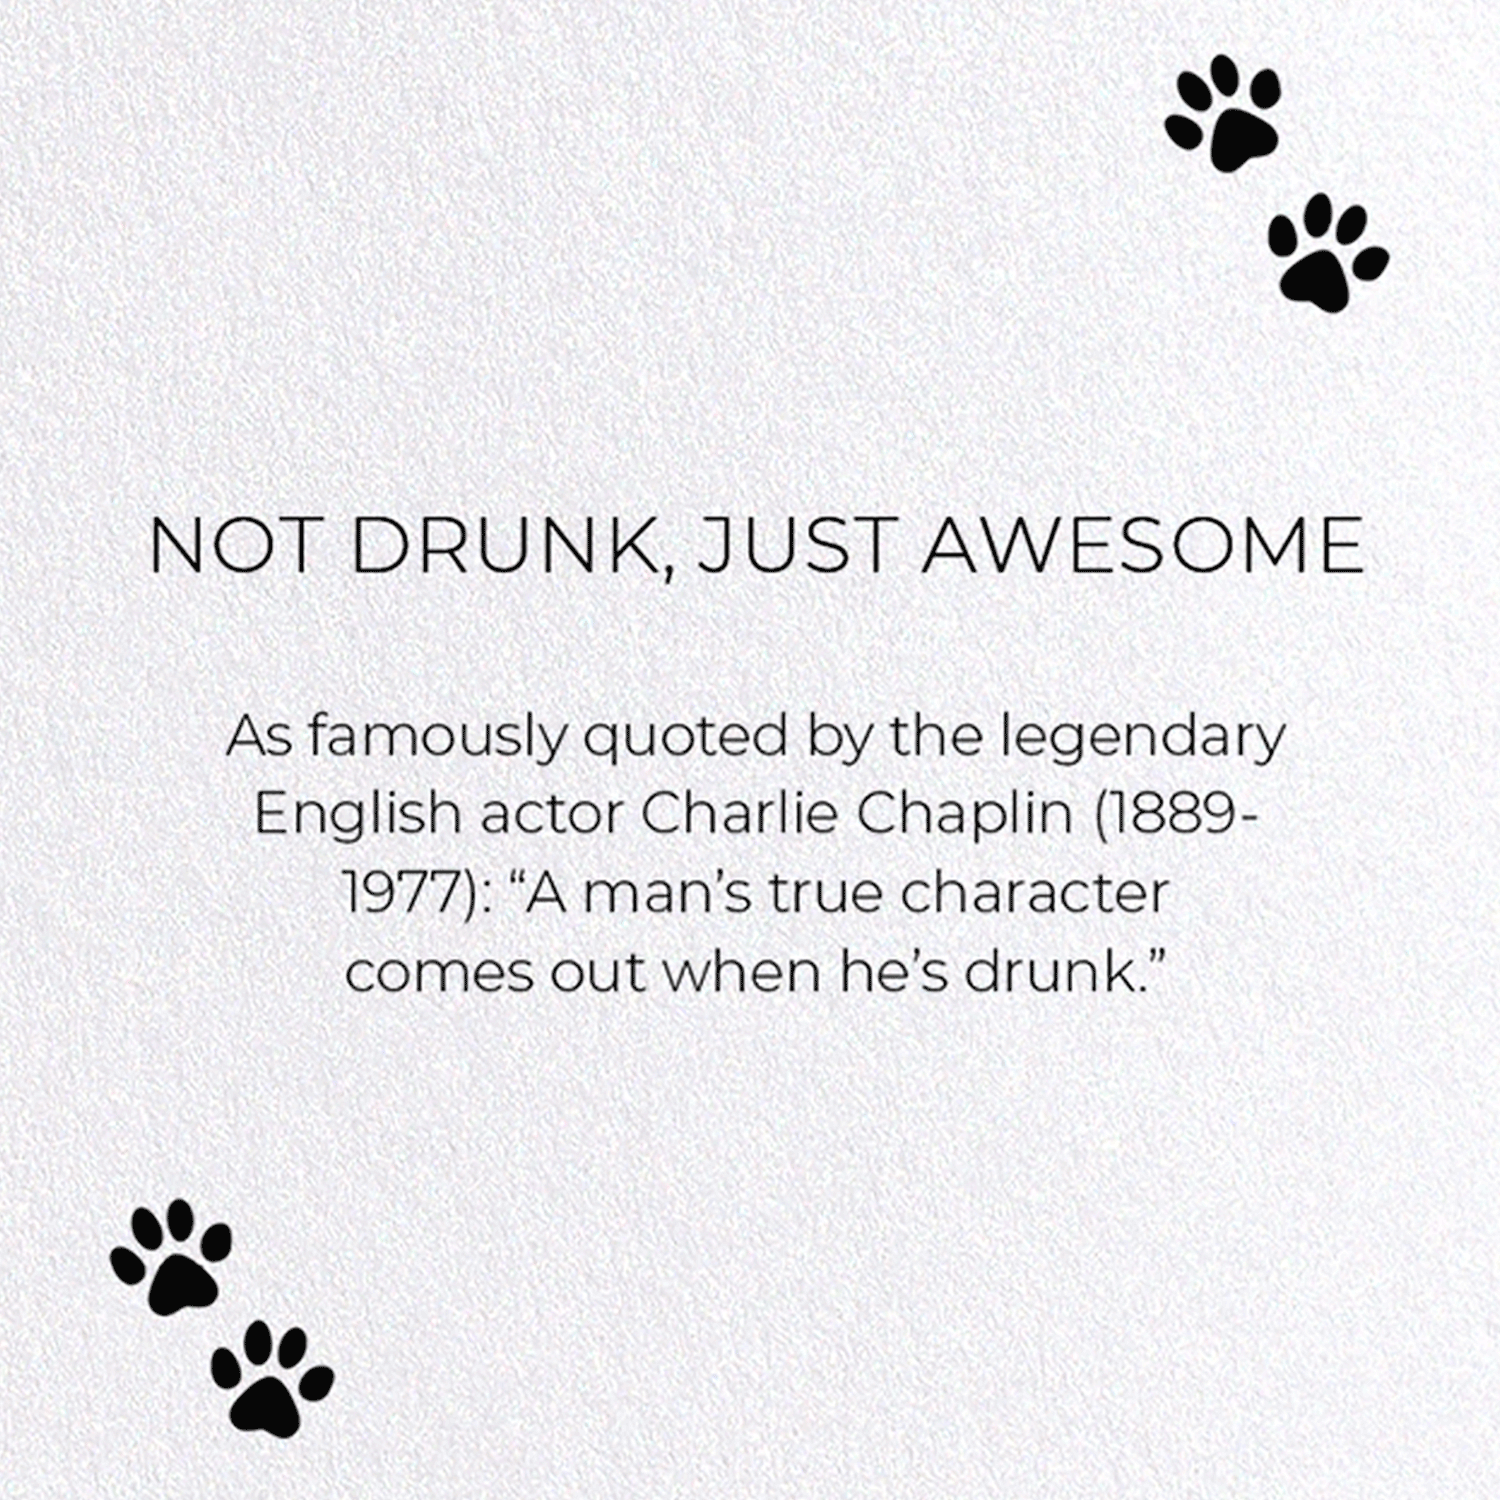 NOT DRUNK, JUST AWESOME: Funny Animal Greeting Card